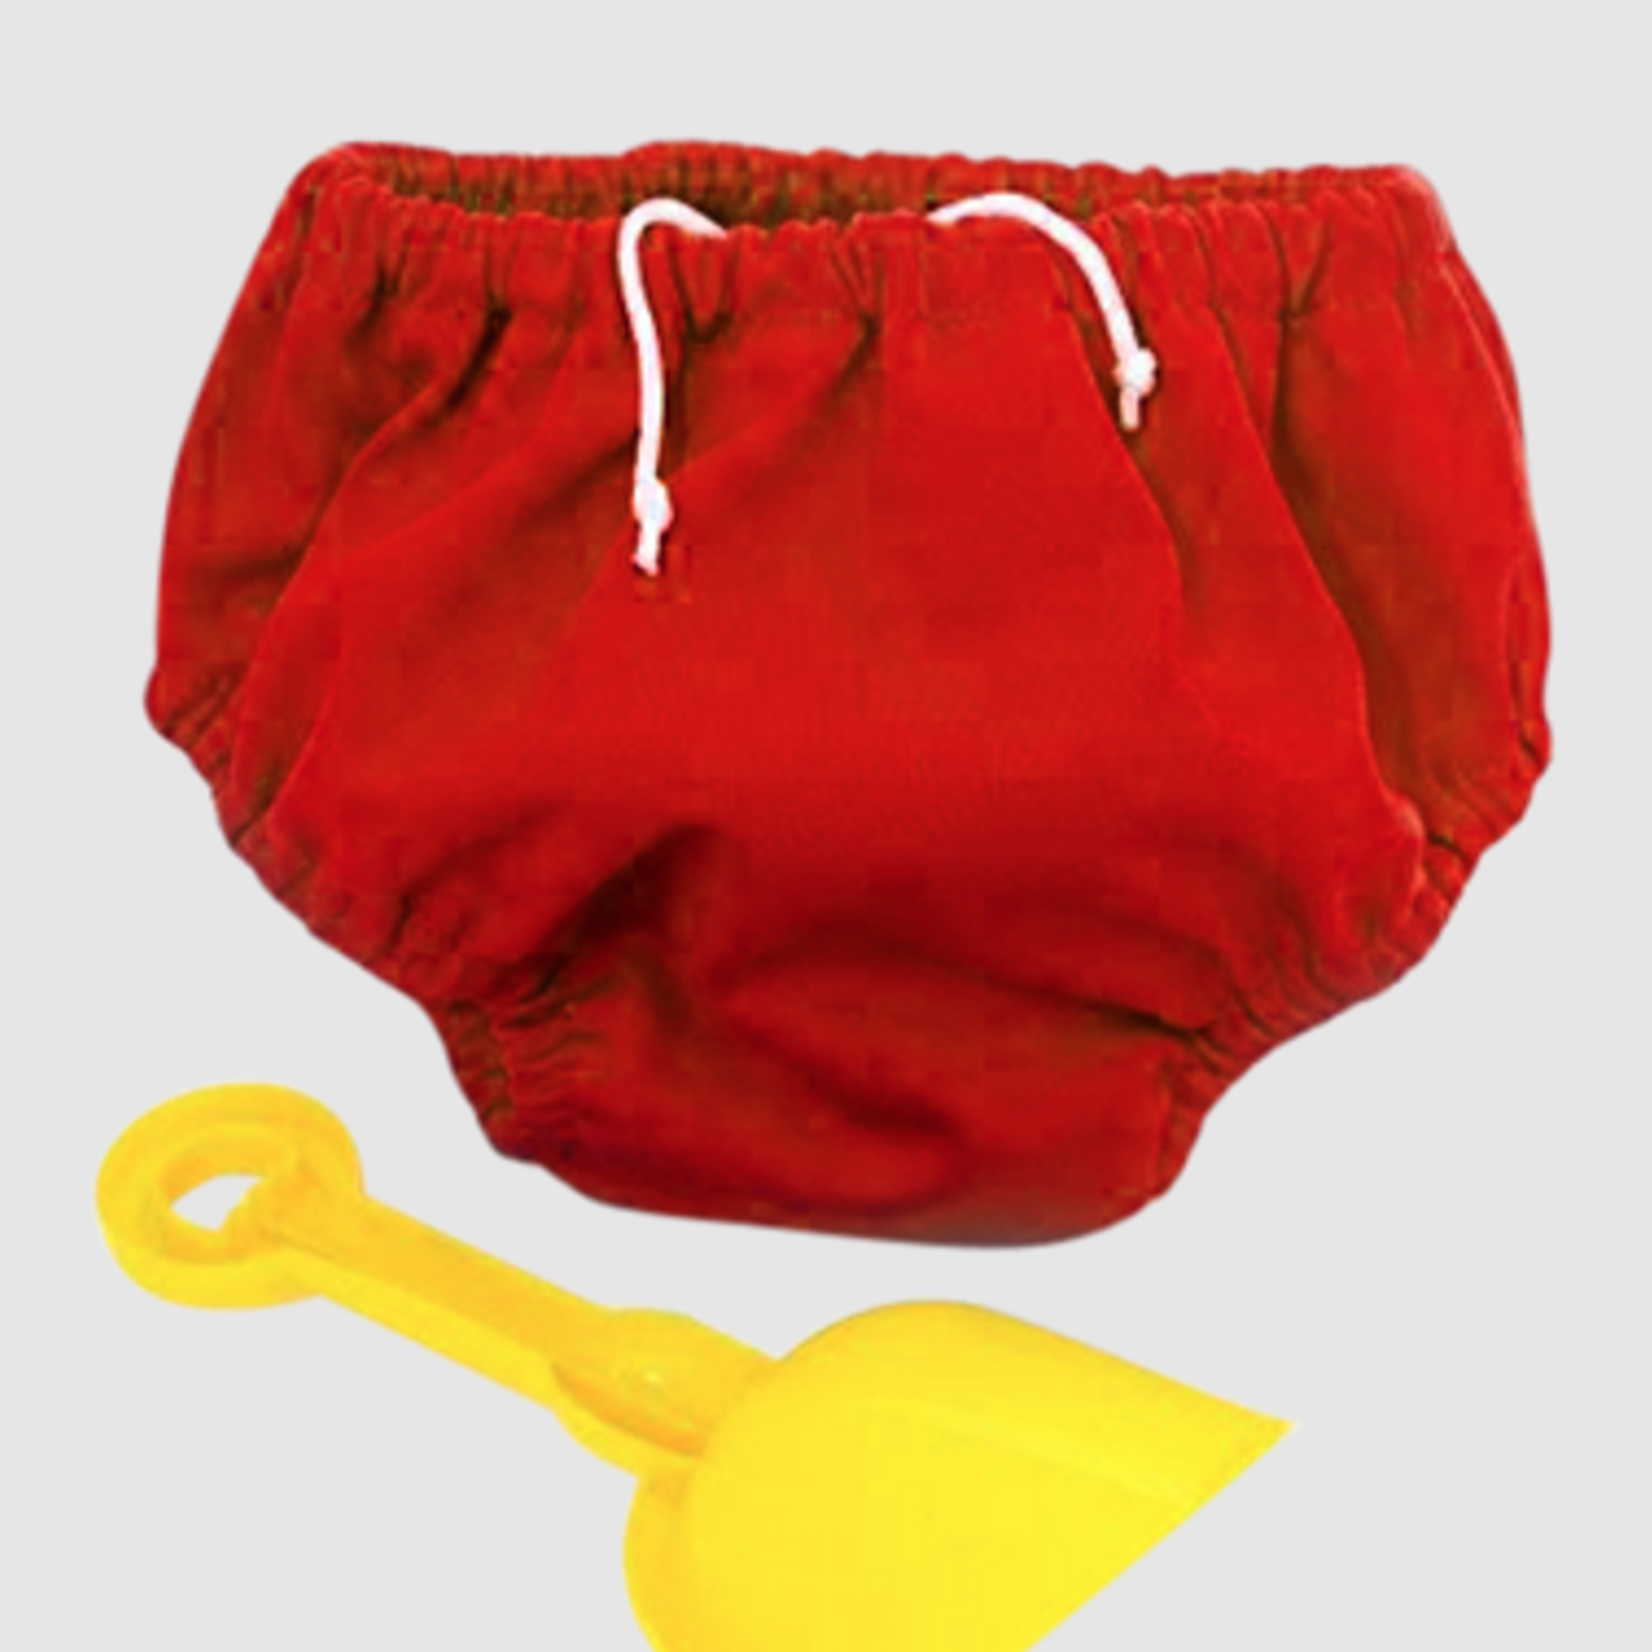 Pea Pods Swimmers Red